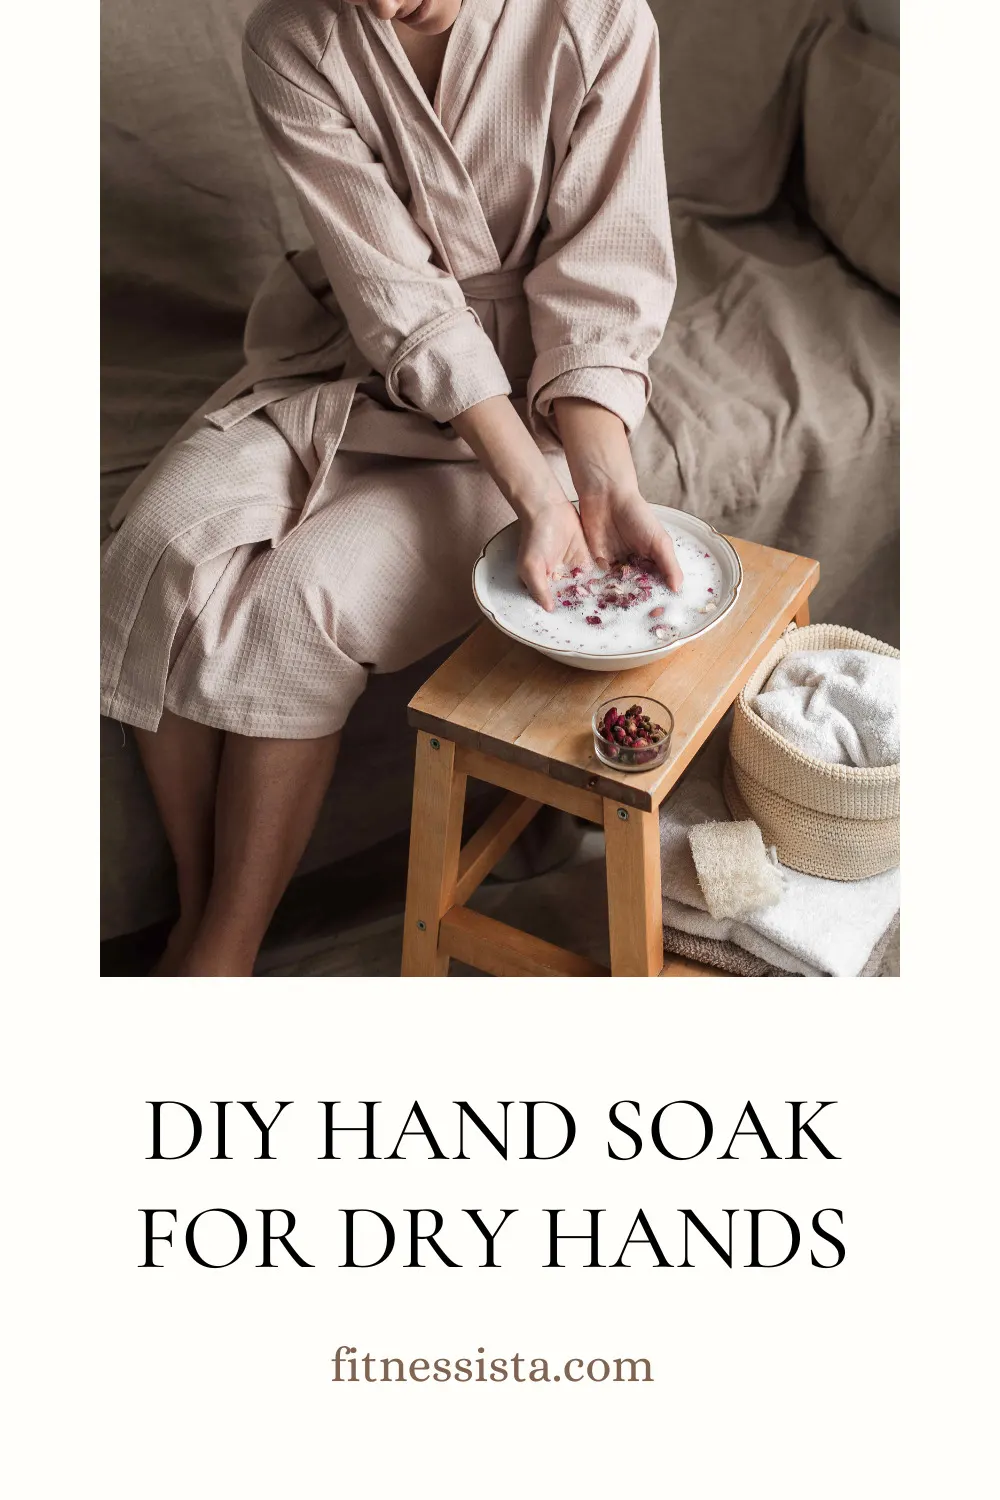 DIY Hand Soak for Dry Hands - The Fitnessista